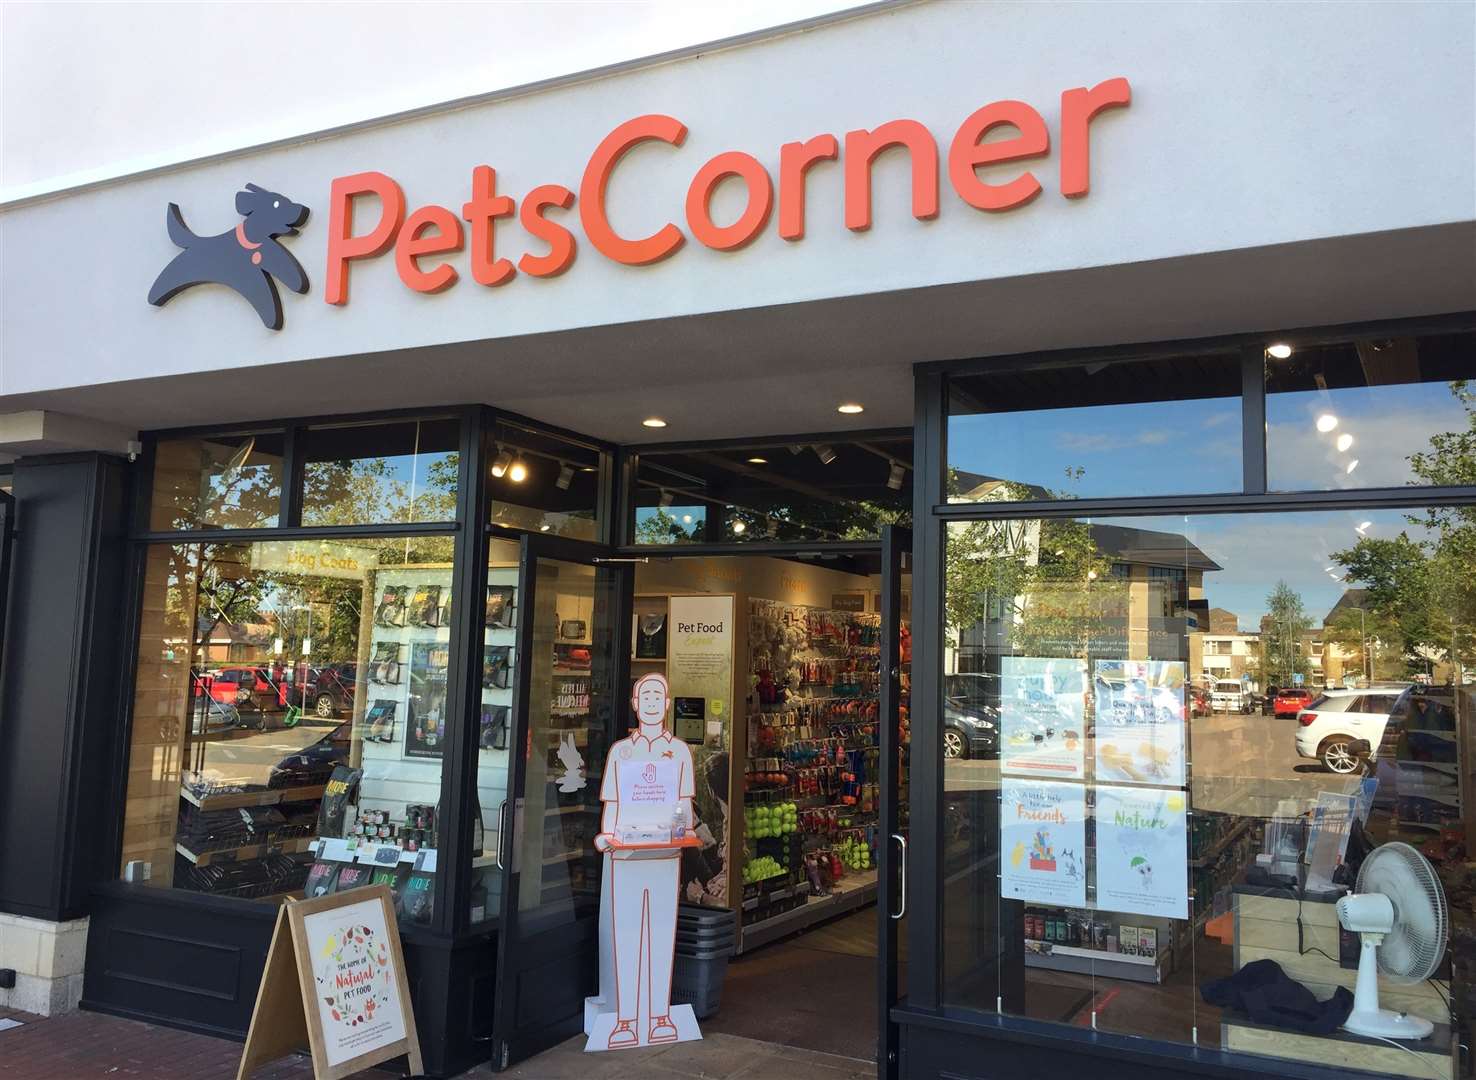 Pets Corner in Sevenoaks has hand sanitiser available for customers to use